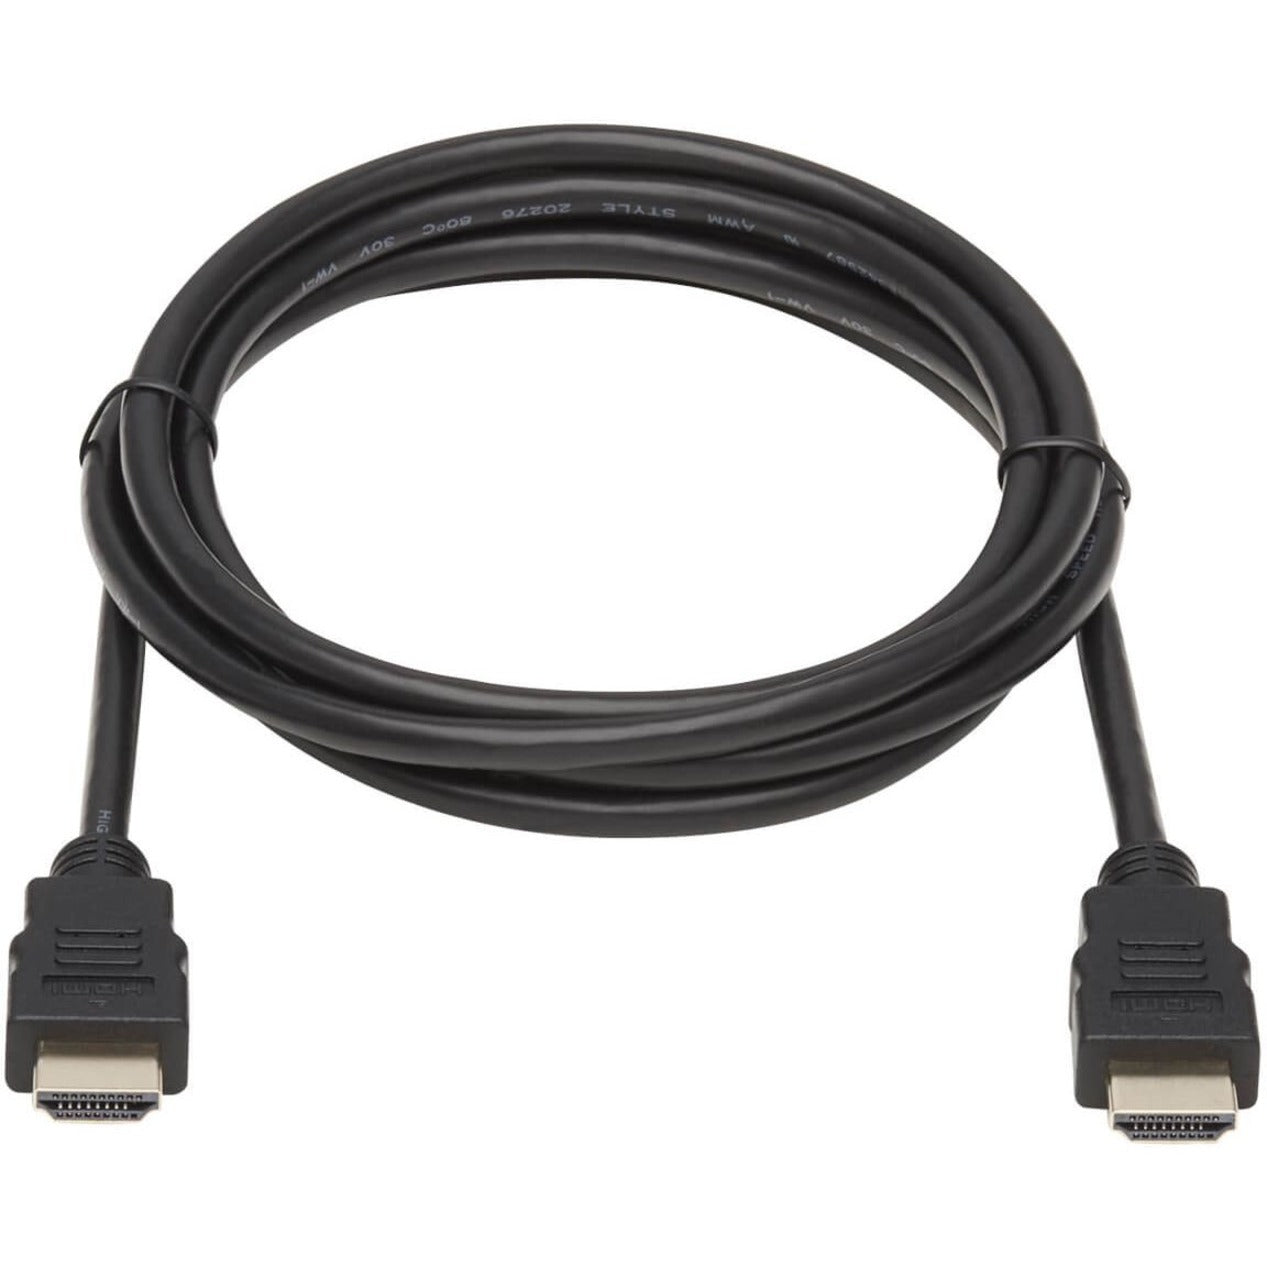 Tripp Lite P568-010 High Speed Audio/Video HDMI Cable, 10 ft, Black